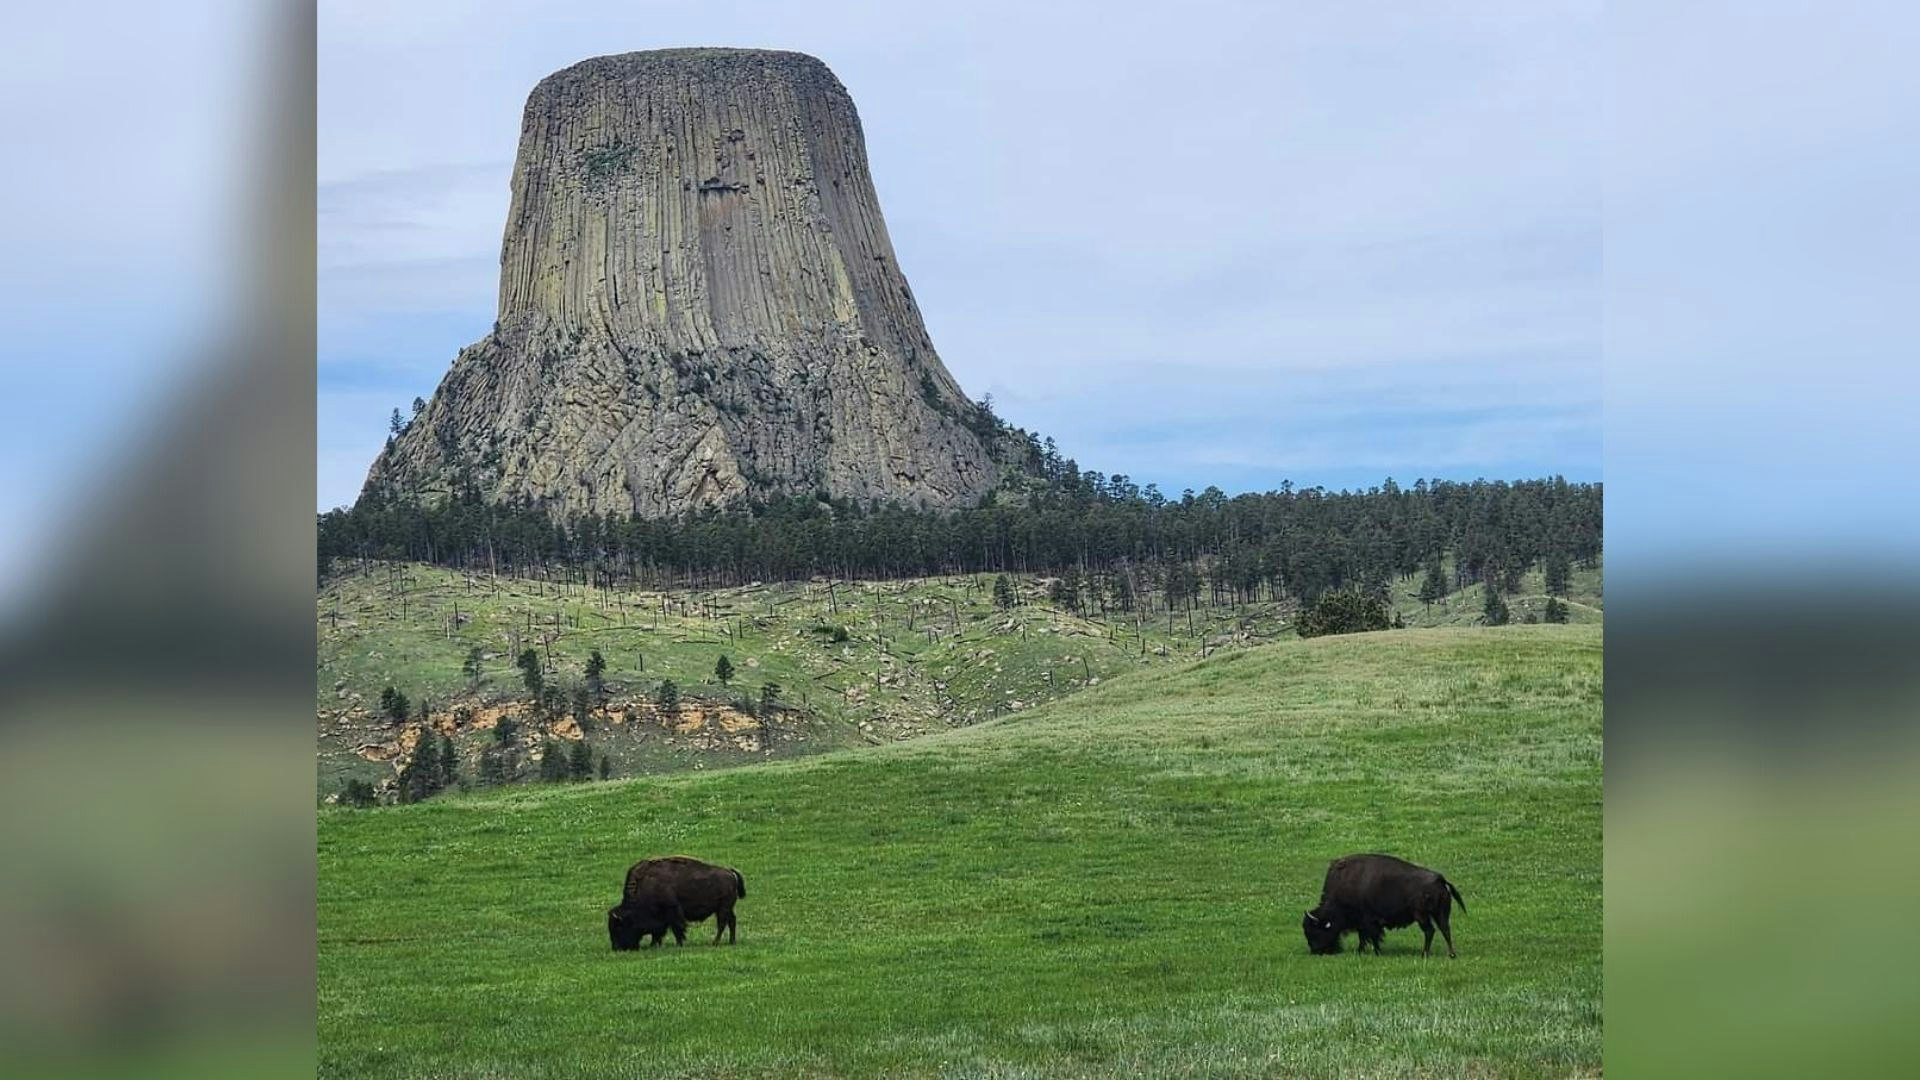 The grasslands around Devils Tower in northeast Wyoming are lush and green.